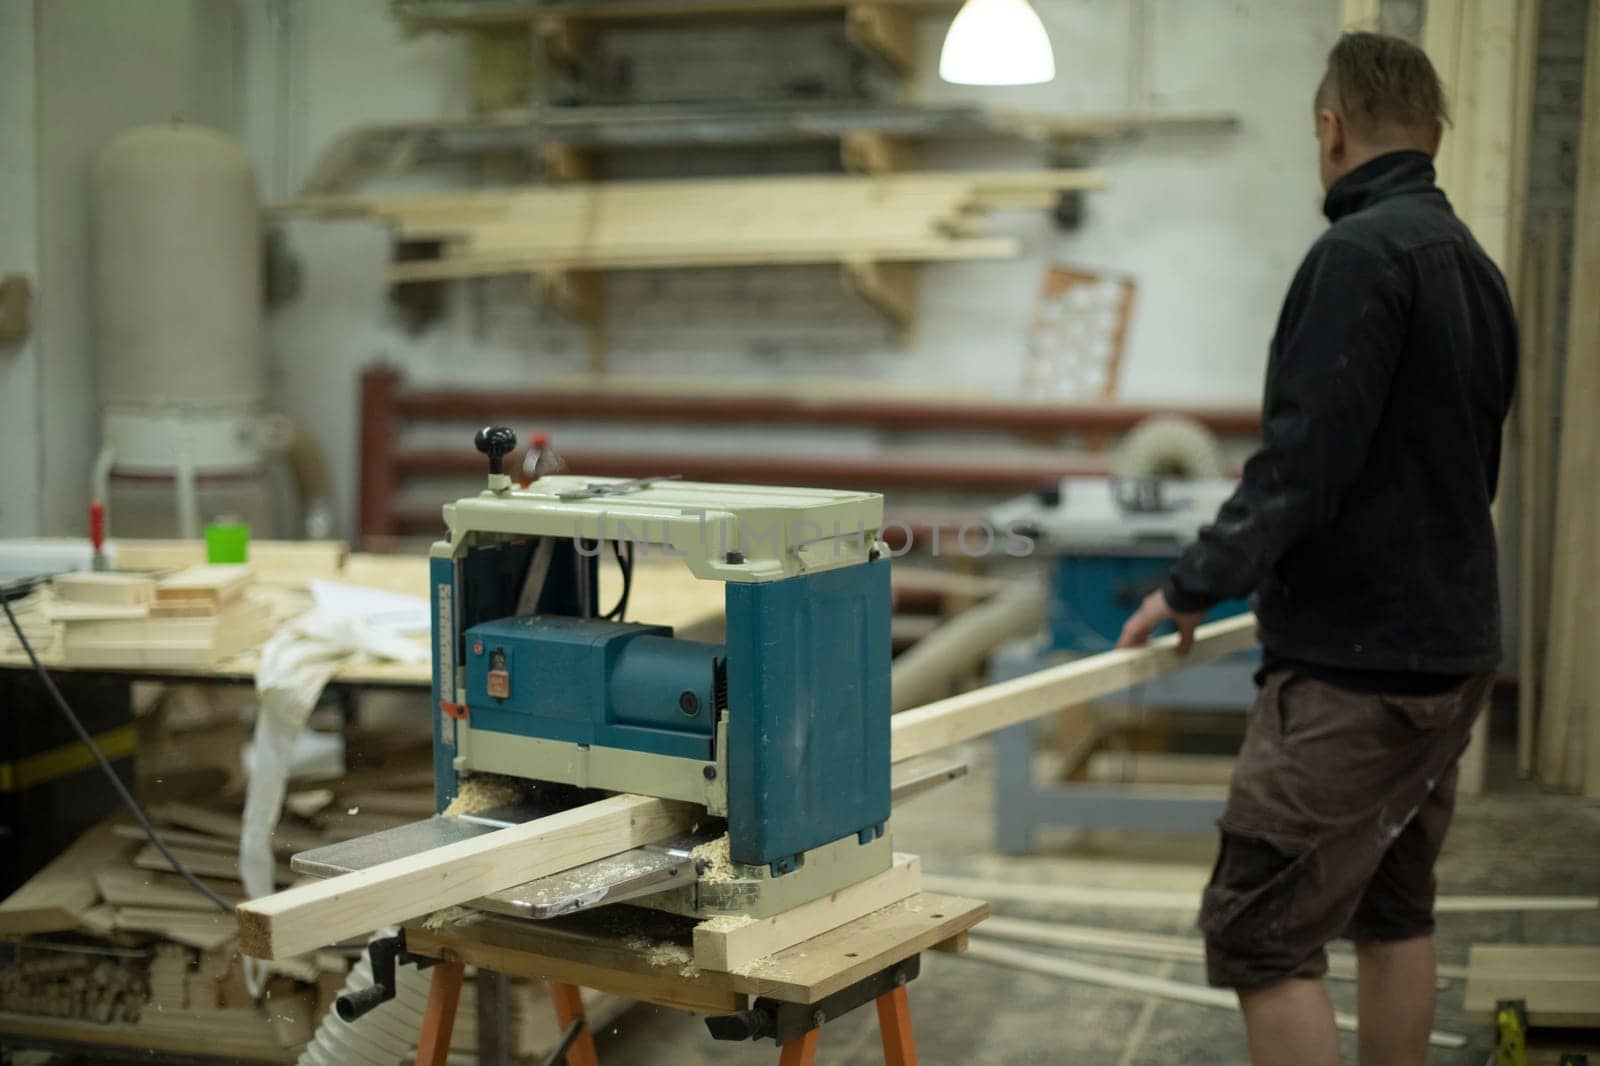 Guy is chipping board on machine. Worker makes furniture. Work in carpentry workshop.